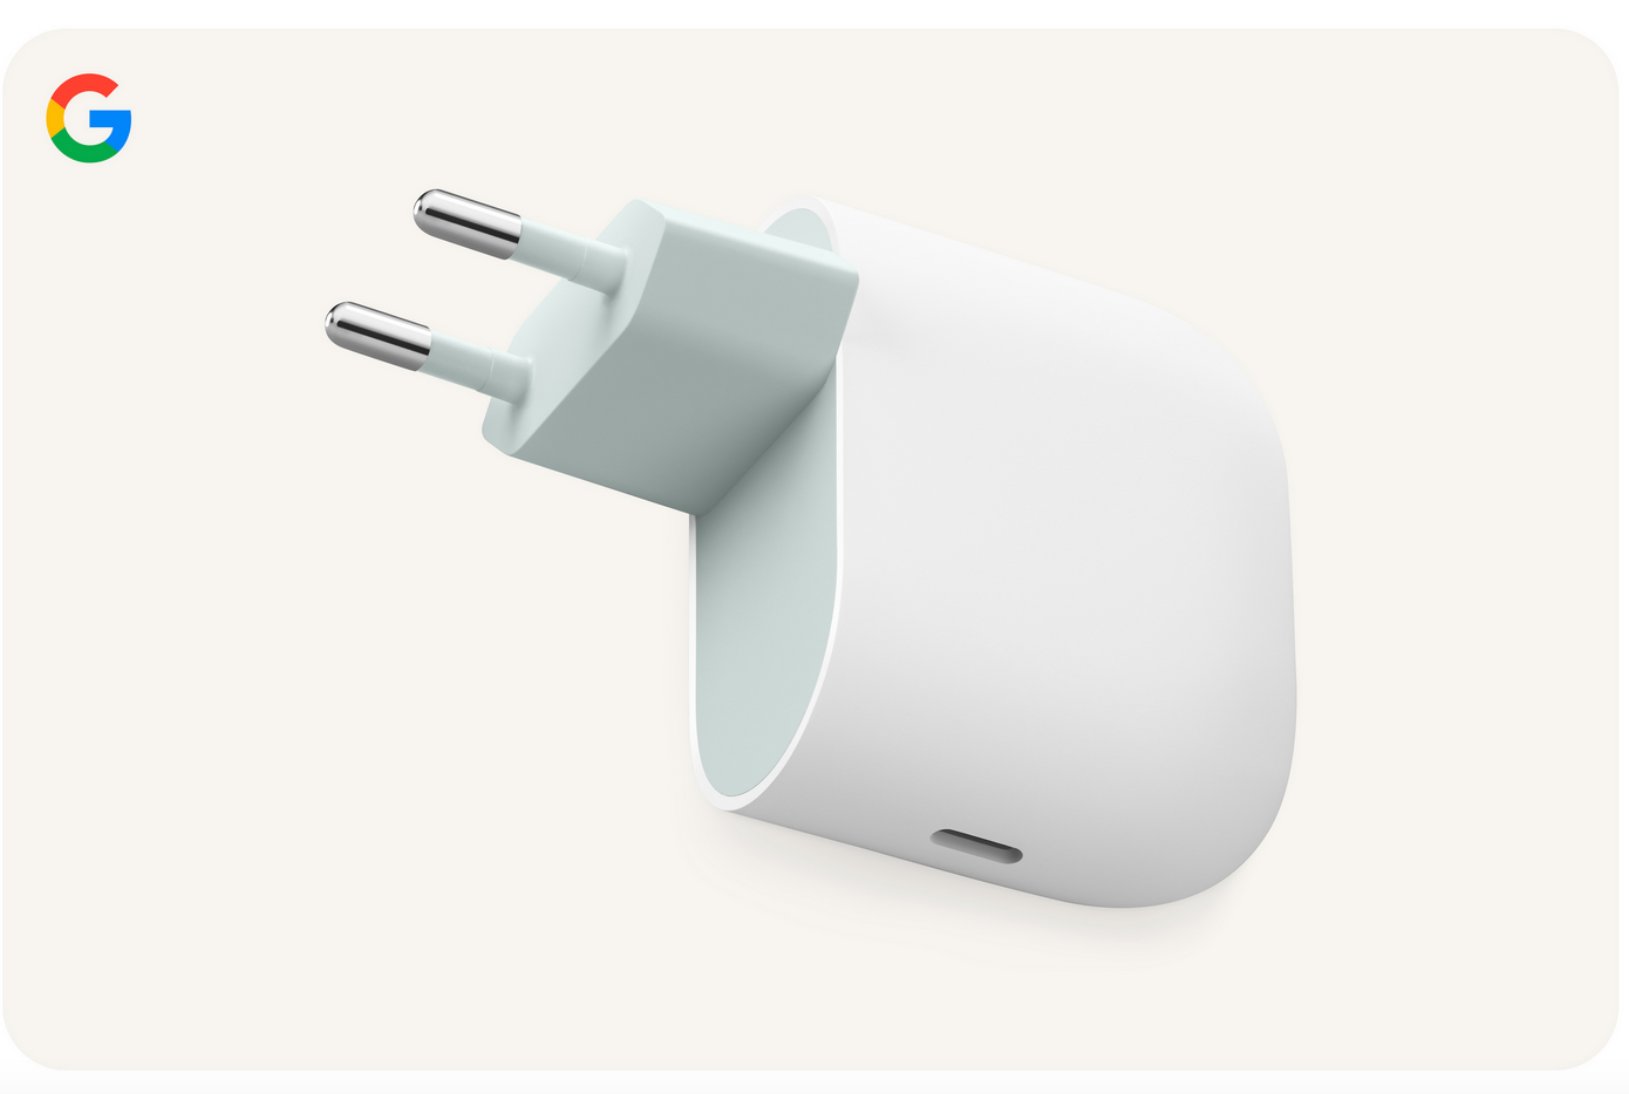 Google will introduce a new 45W charger for the Pixel 9 series